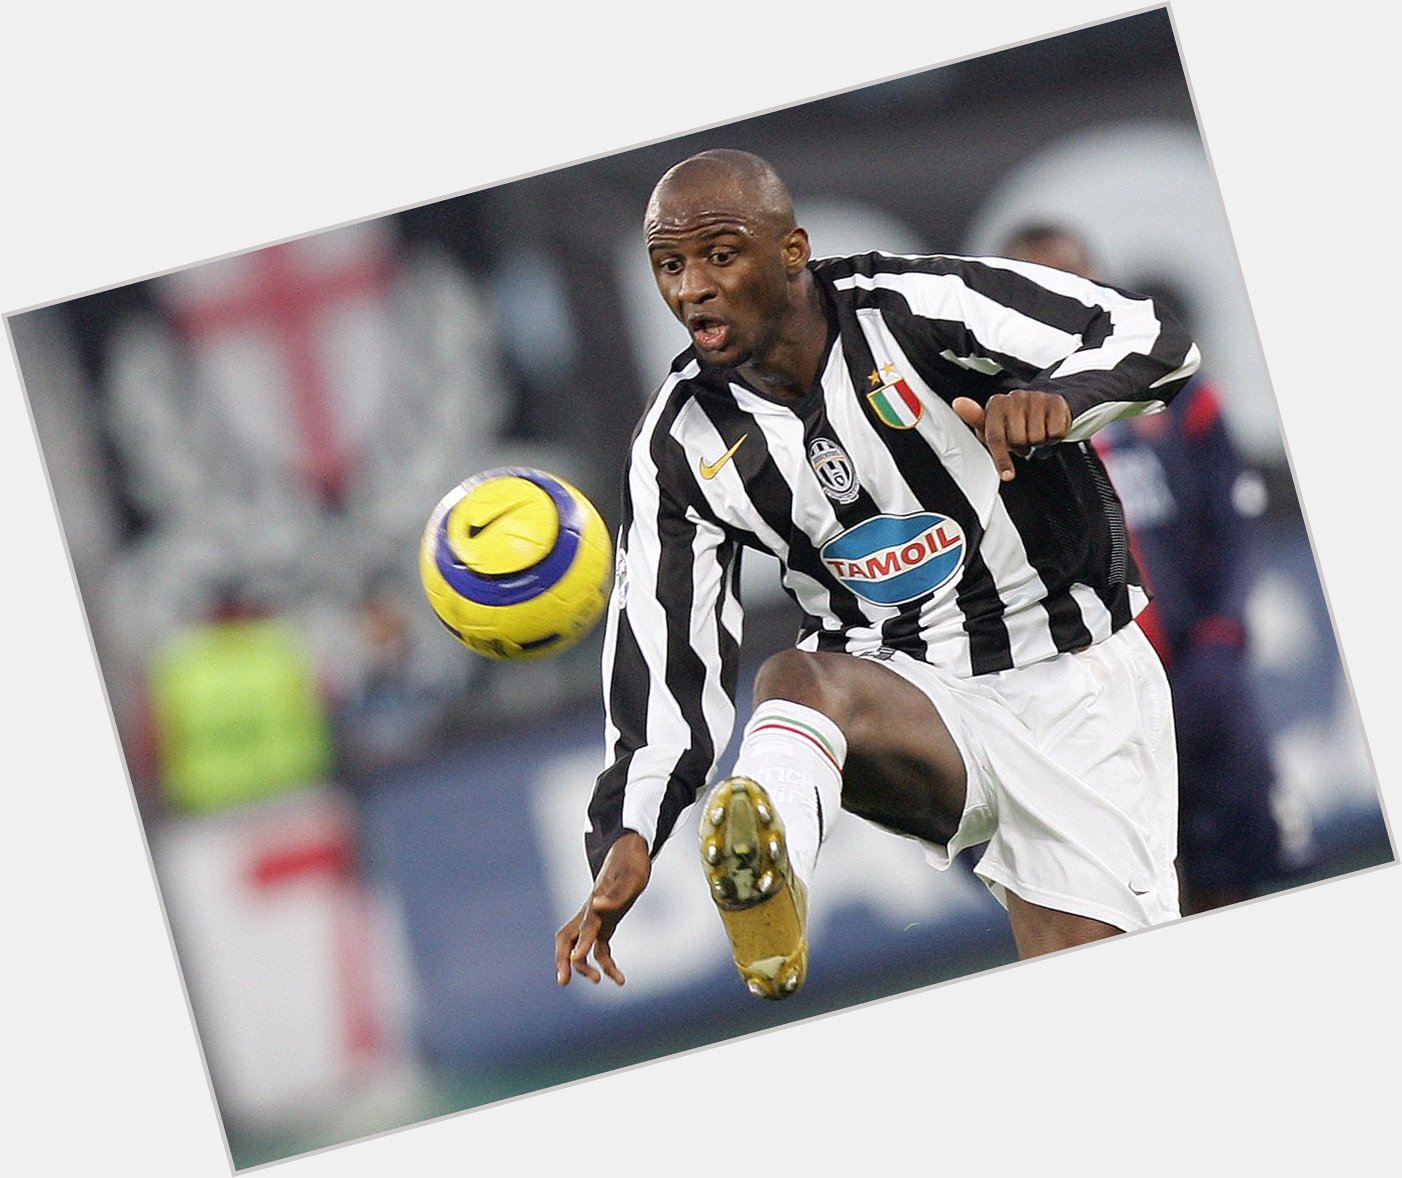 Happy birthday to former Juventus midfielder Patrick Vieira, who turns 41 today.

Games: 42
Goals: 5
Assists: 2 : 2 